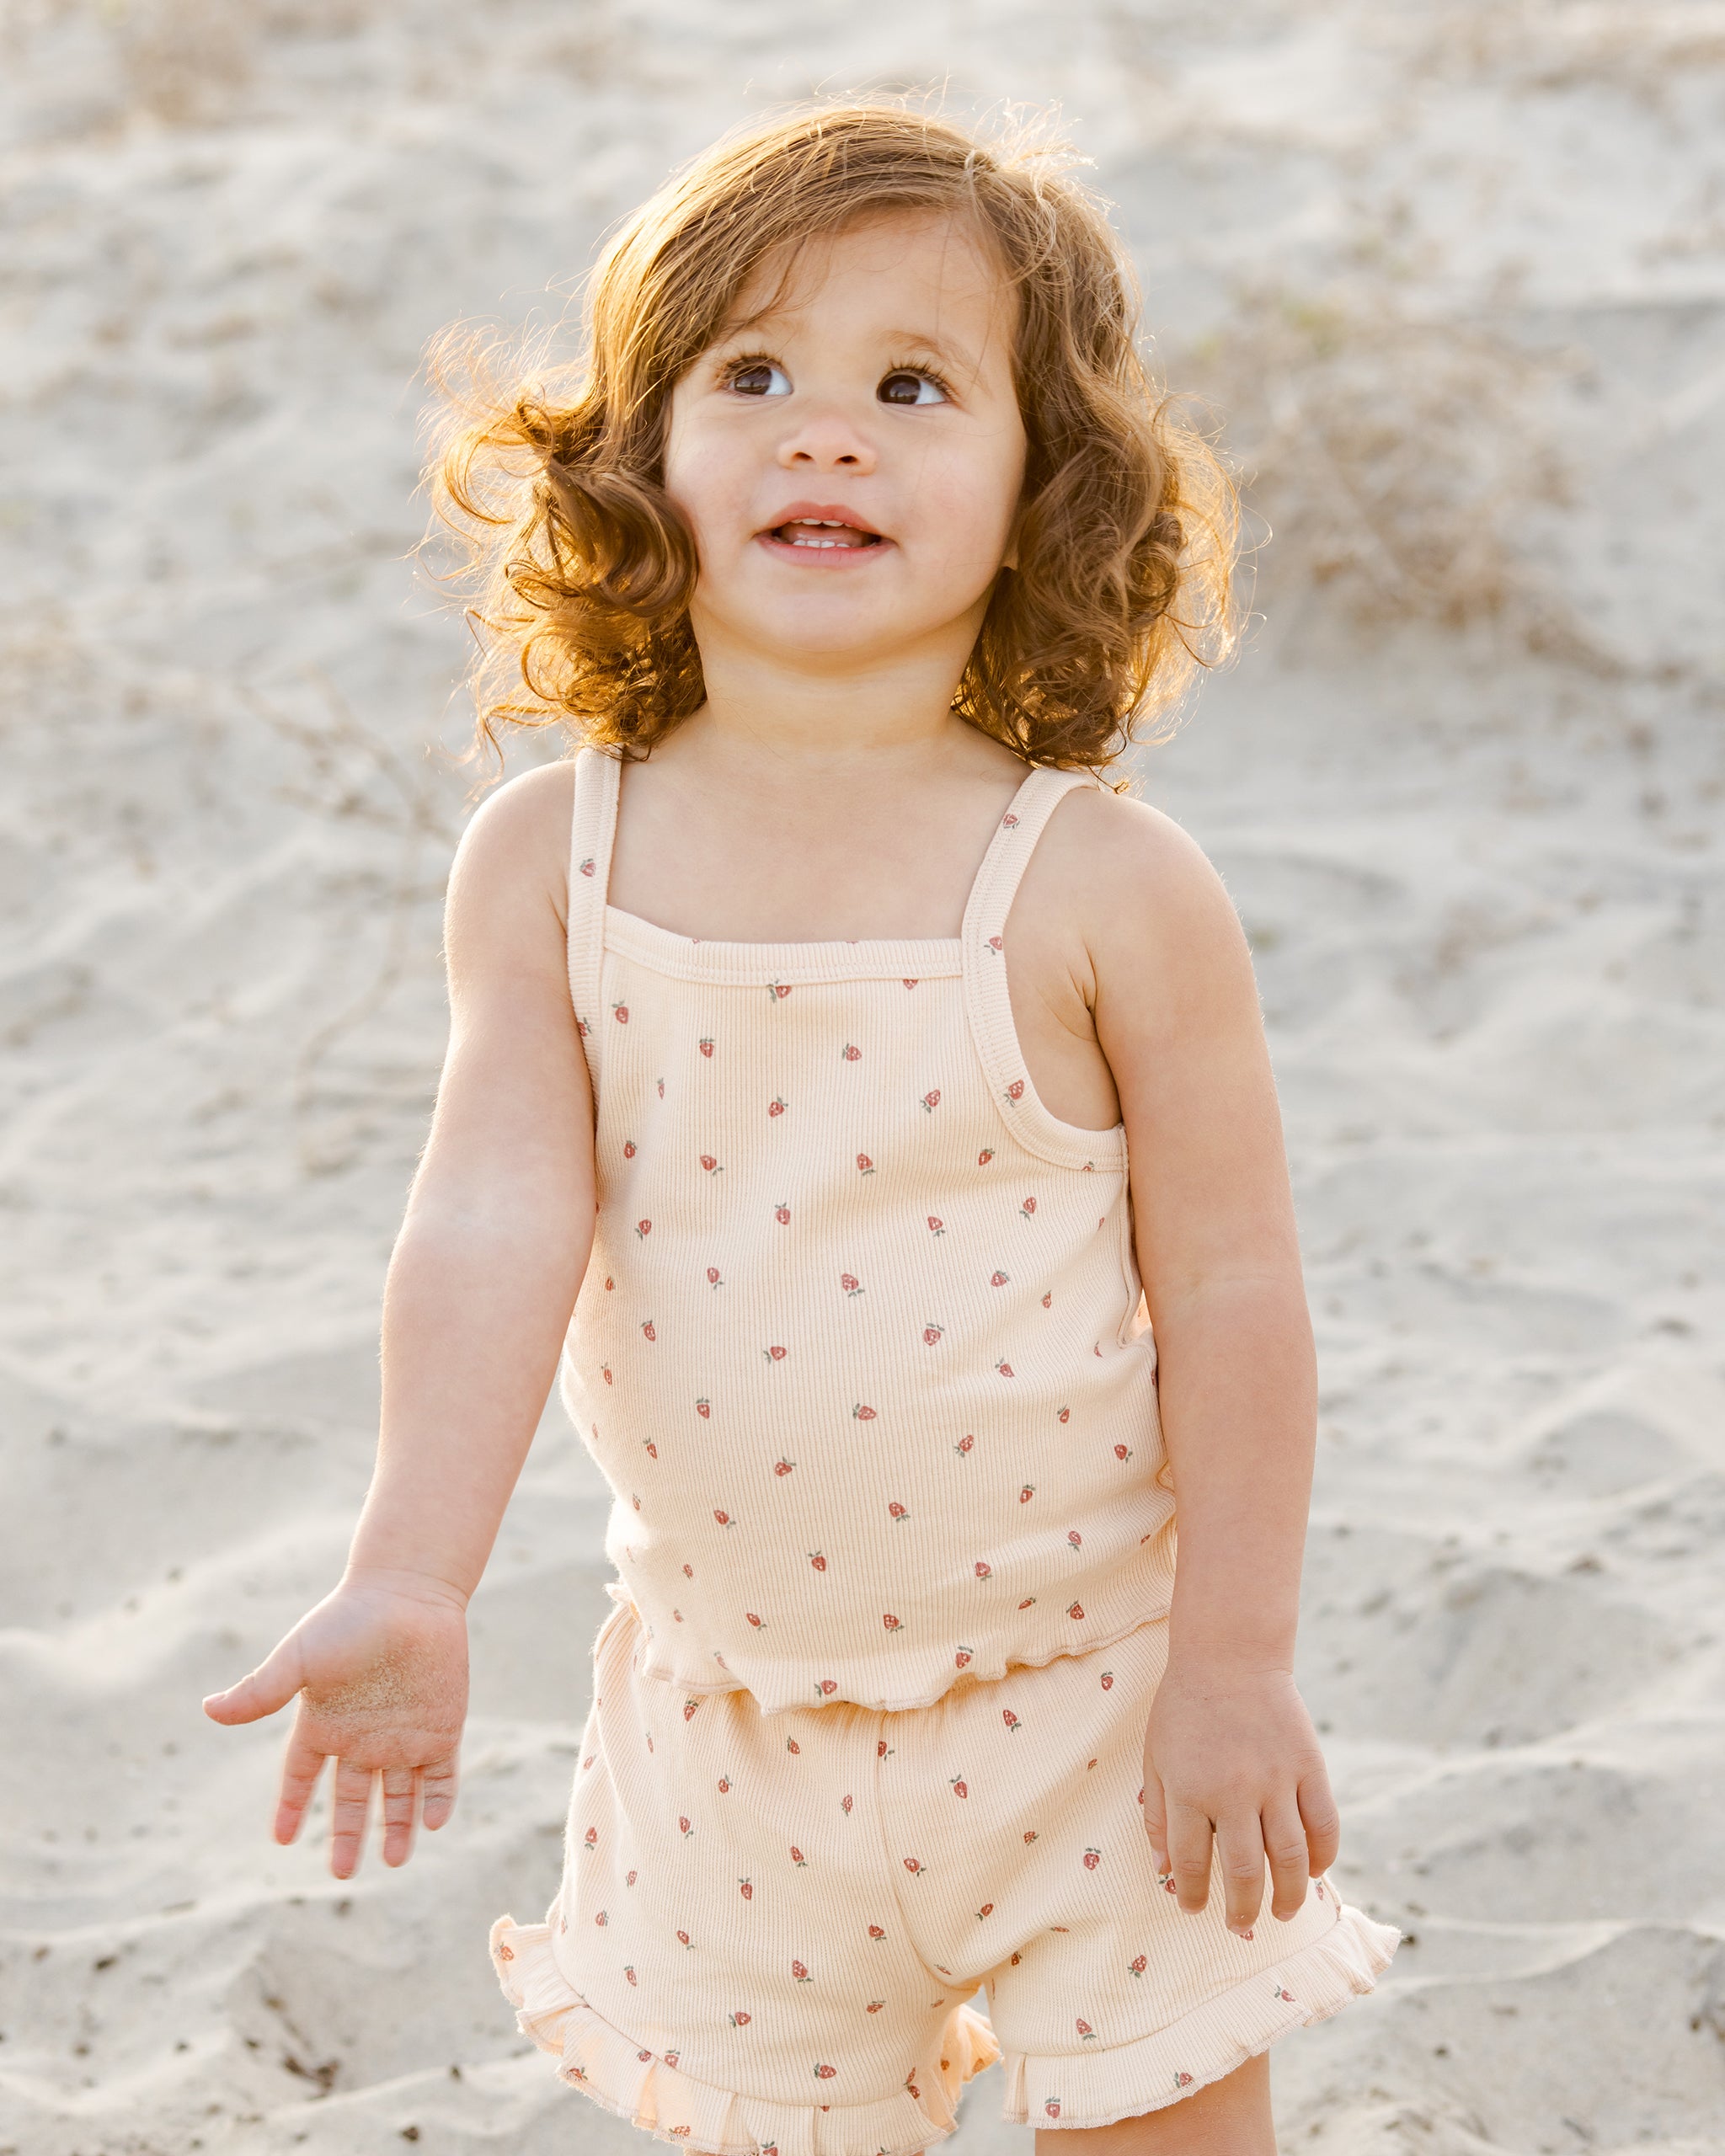 Evie Tank + Shortie Set || Strawberries - Rylee + Cru | Kids Clothes | Trendy Baby Clothes | Modern Infant Outfits |